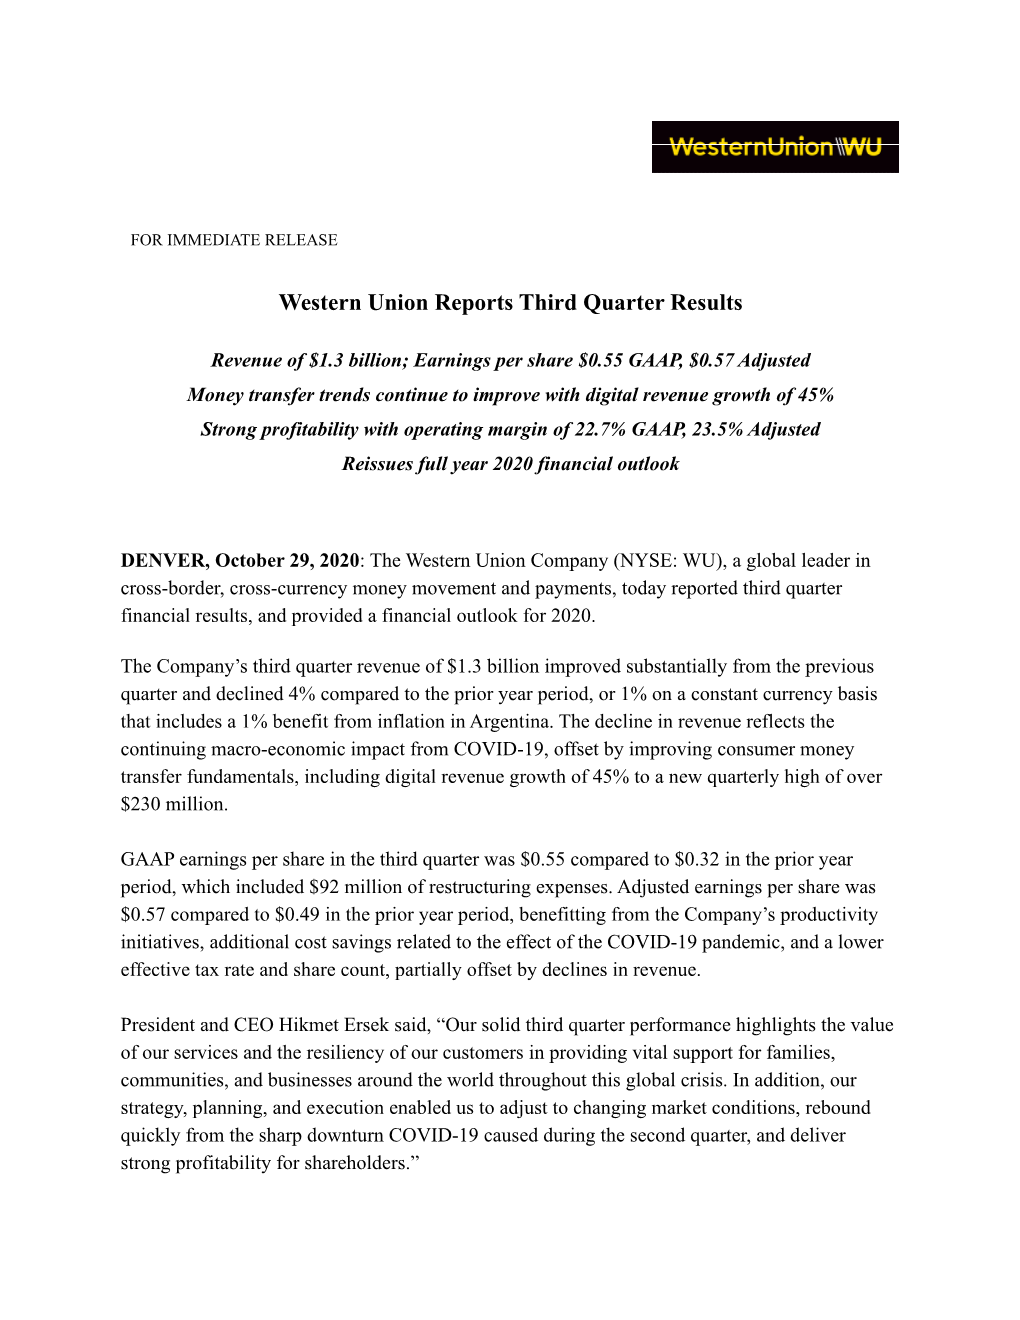 Western Union Reports Third Quarter Results